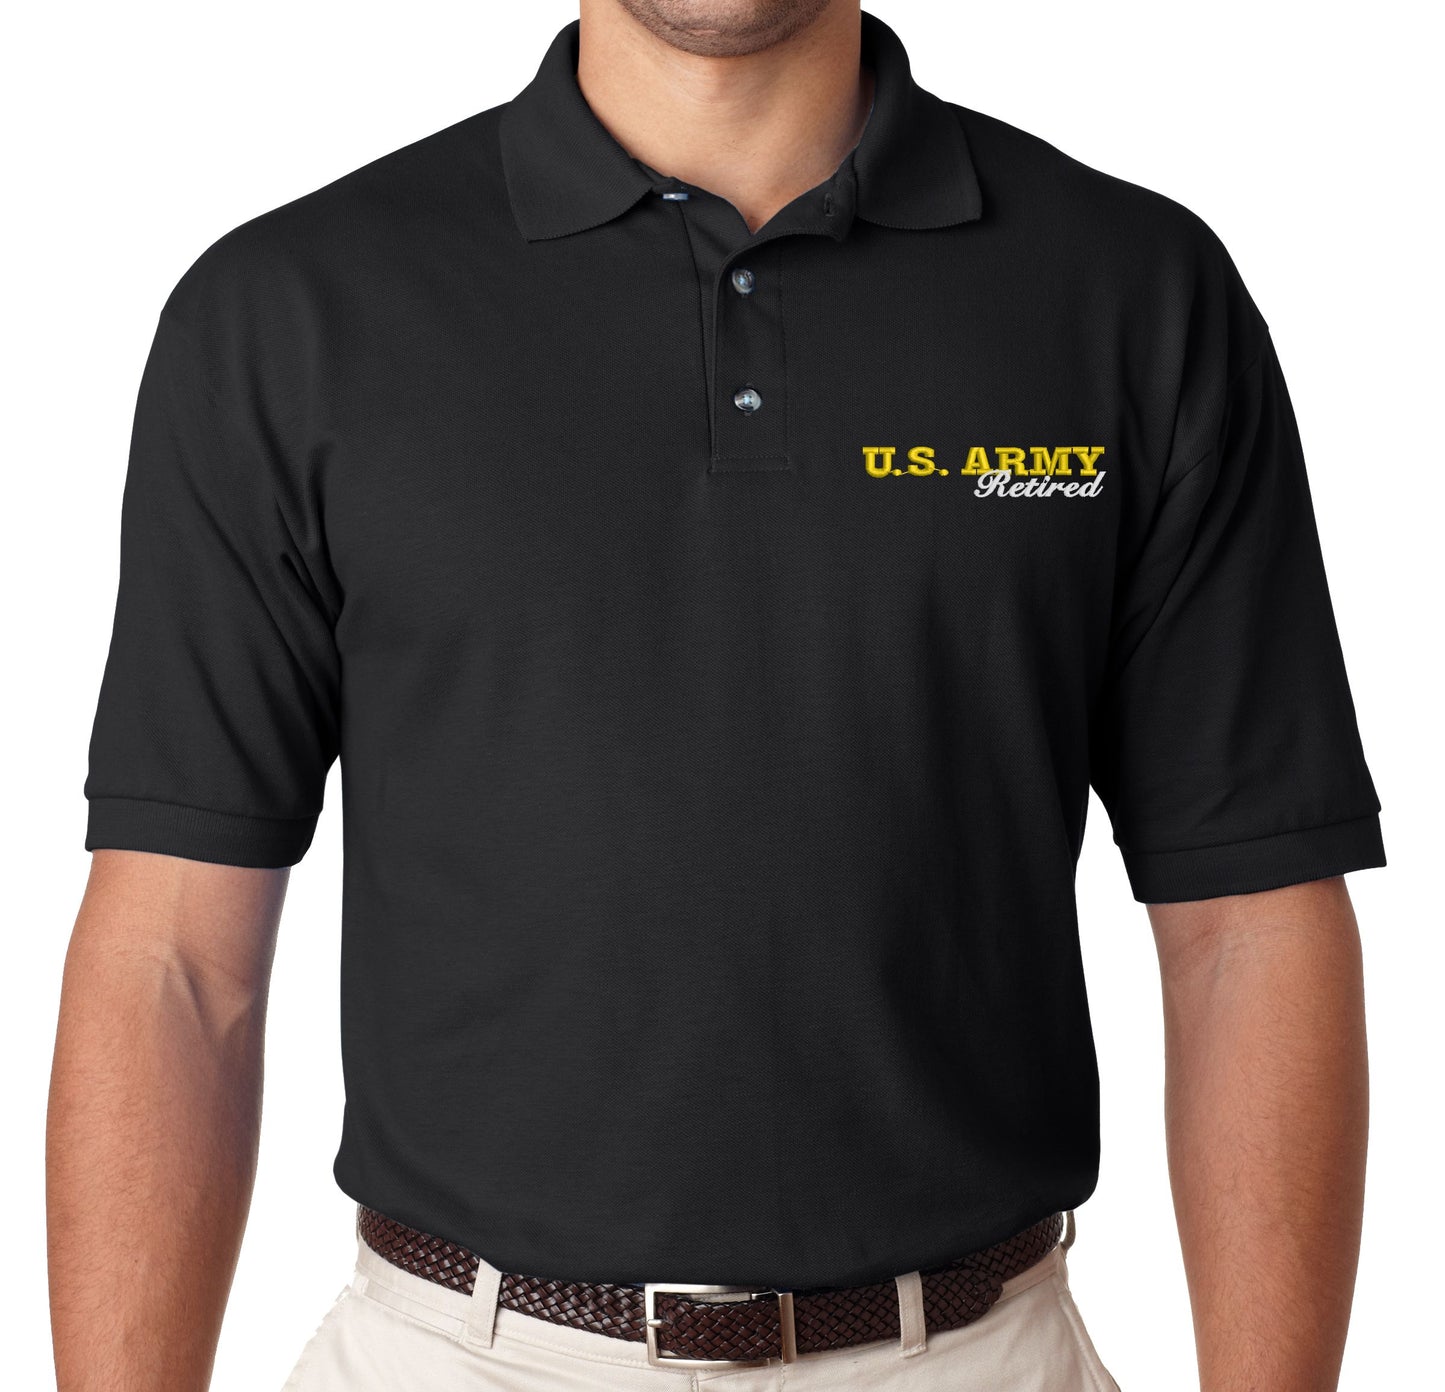 US Army Retired Polo Shirt